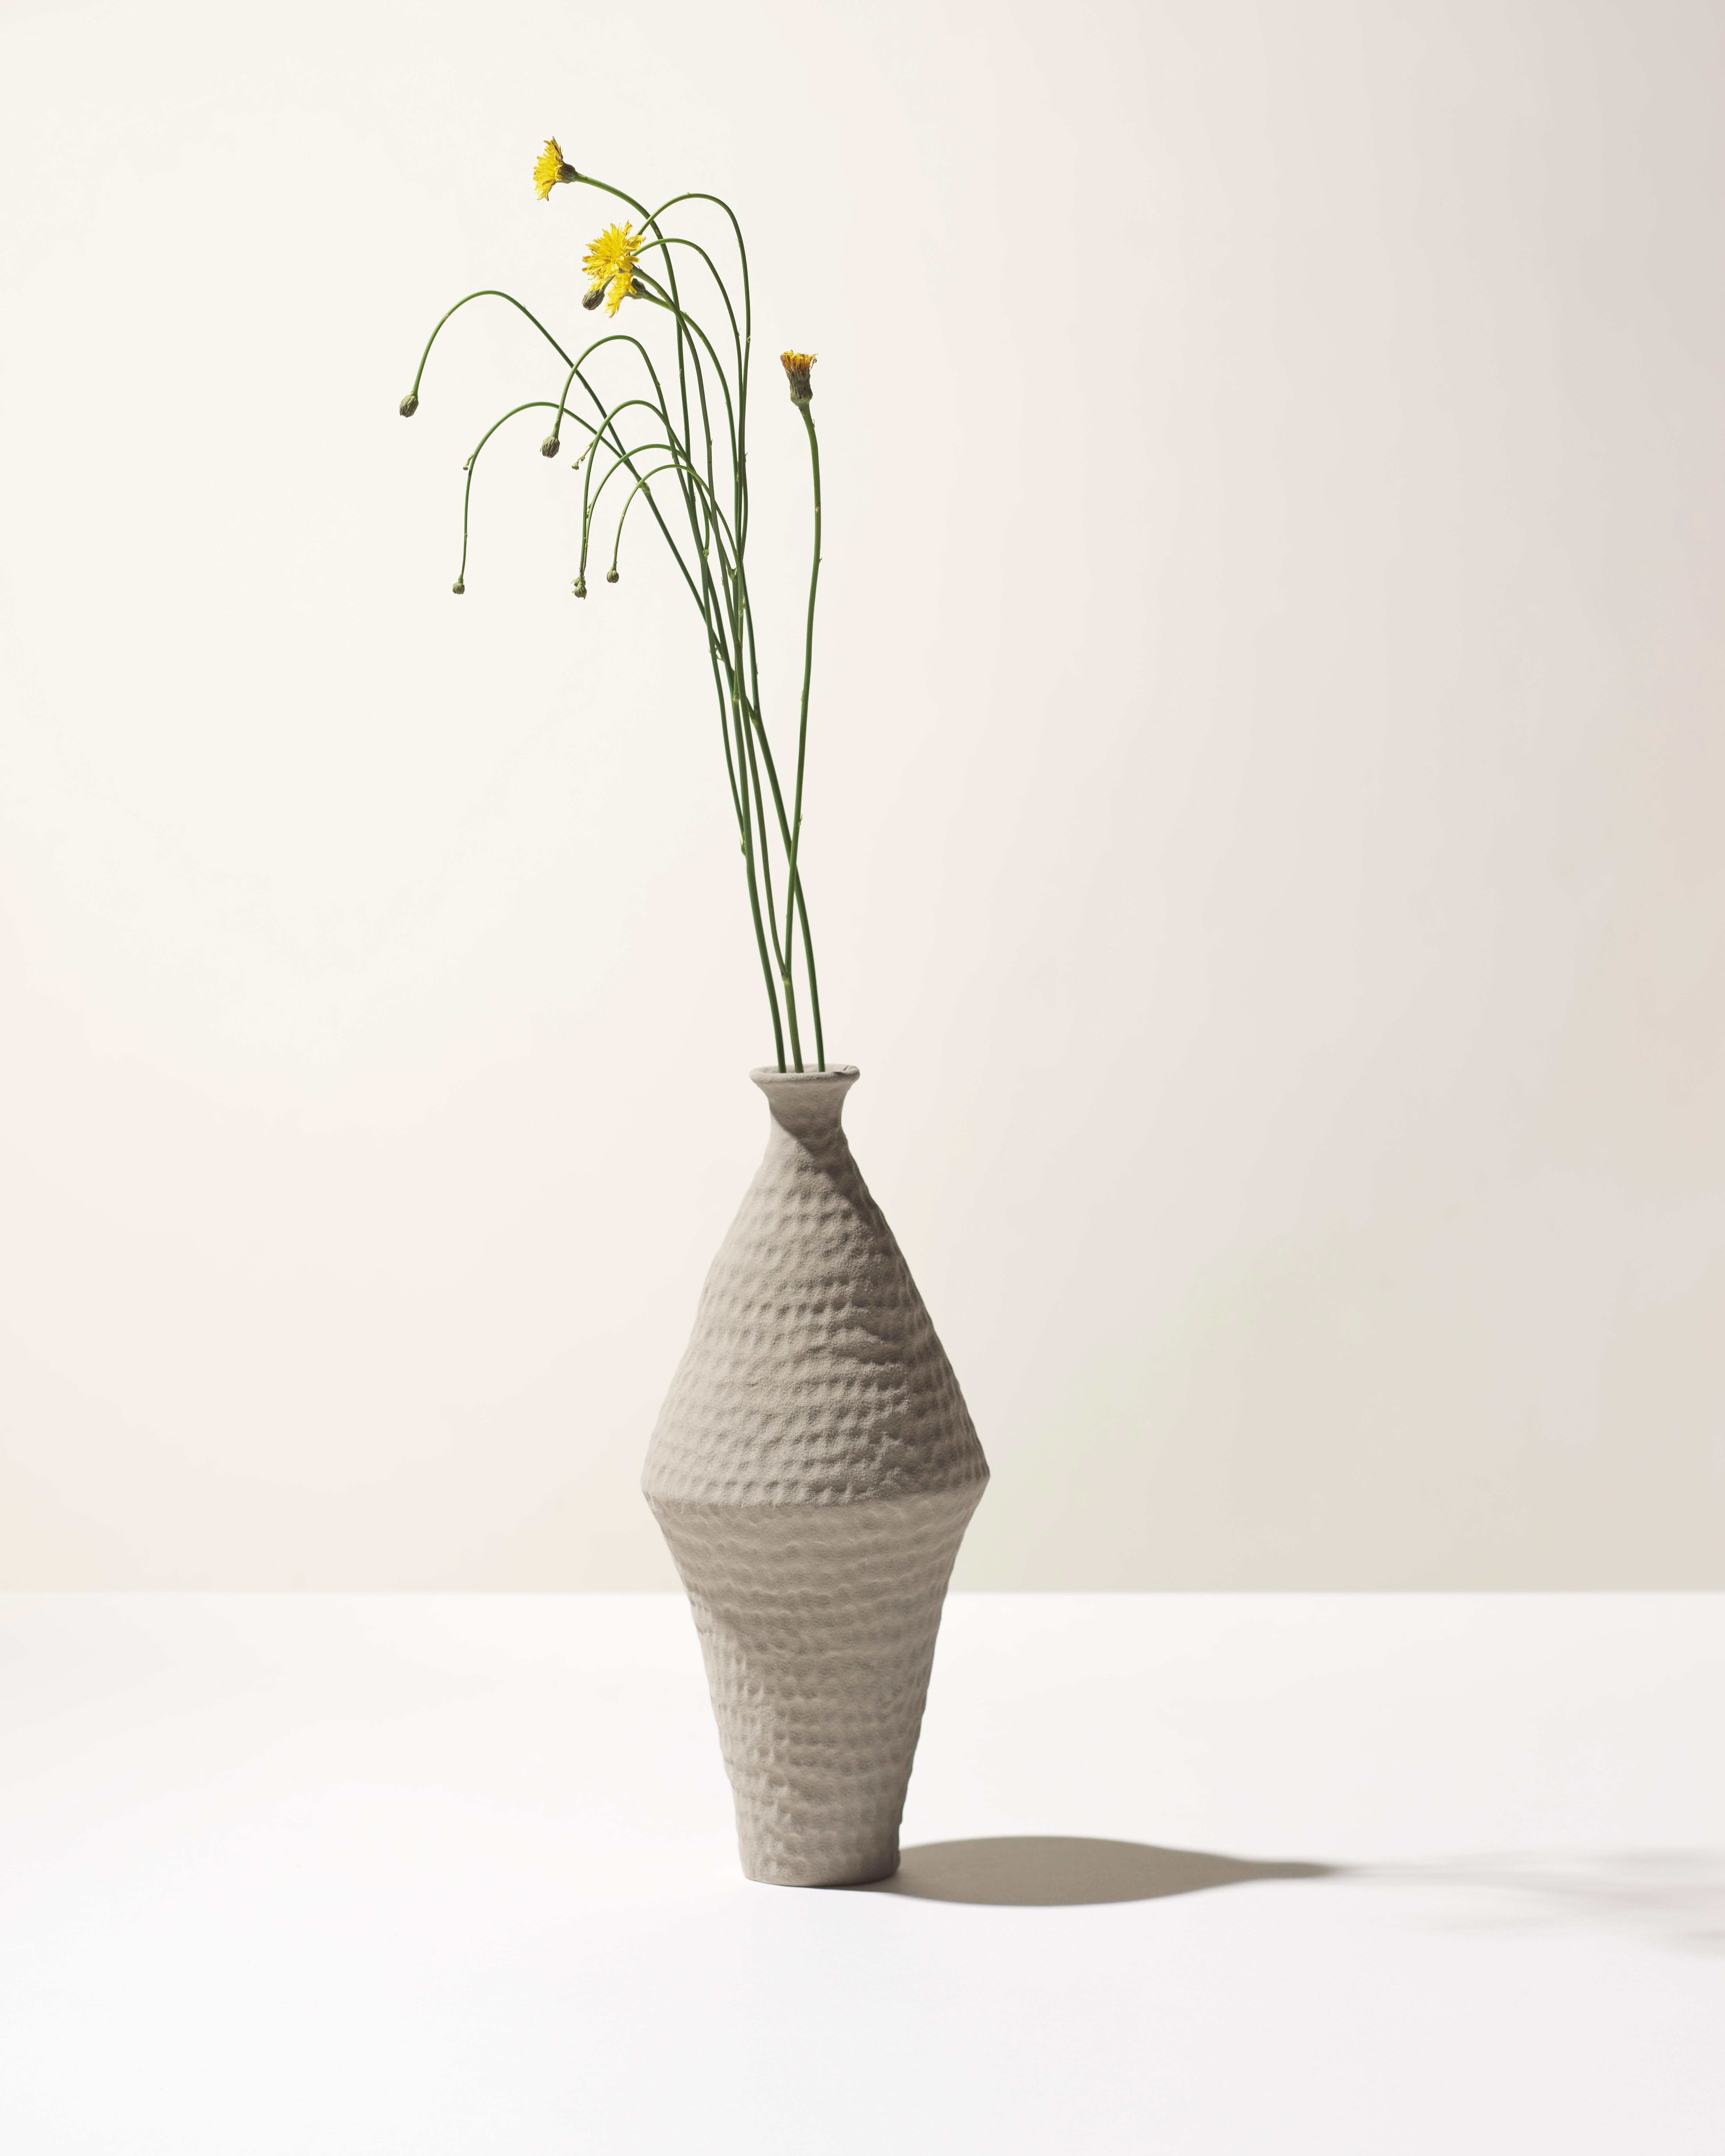 Made in Italy rhomboid vase in light grey matt color, this pottery peace was designed by Andrea Anastasio at the historical Bottega Cercamica Gatti 1928 in Faenza, Italy, specialized on creating ceramic art, that goes perfect for people passionate